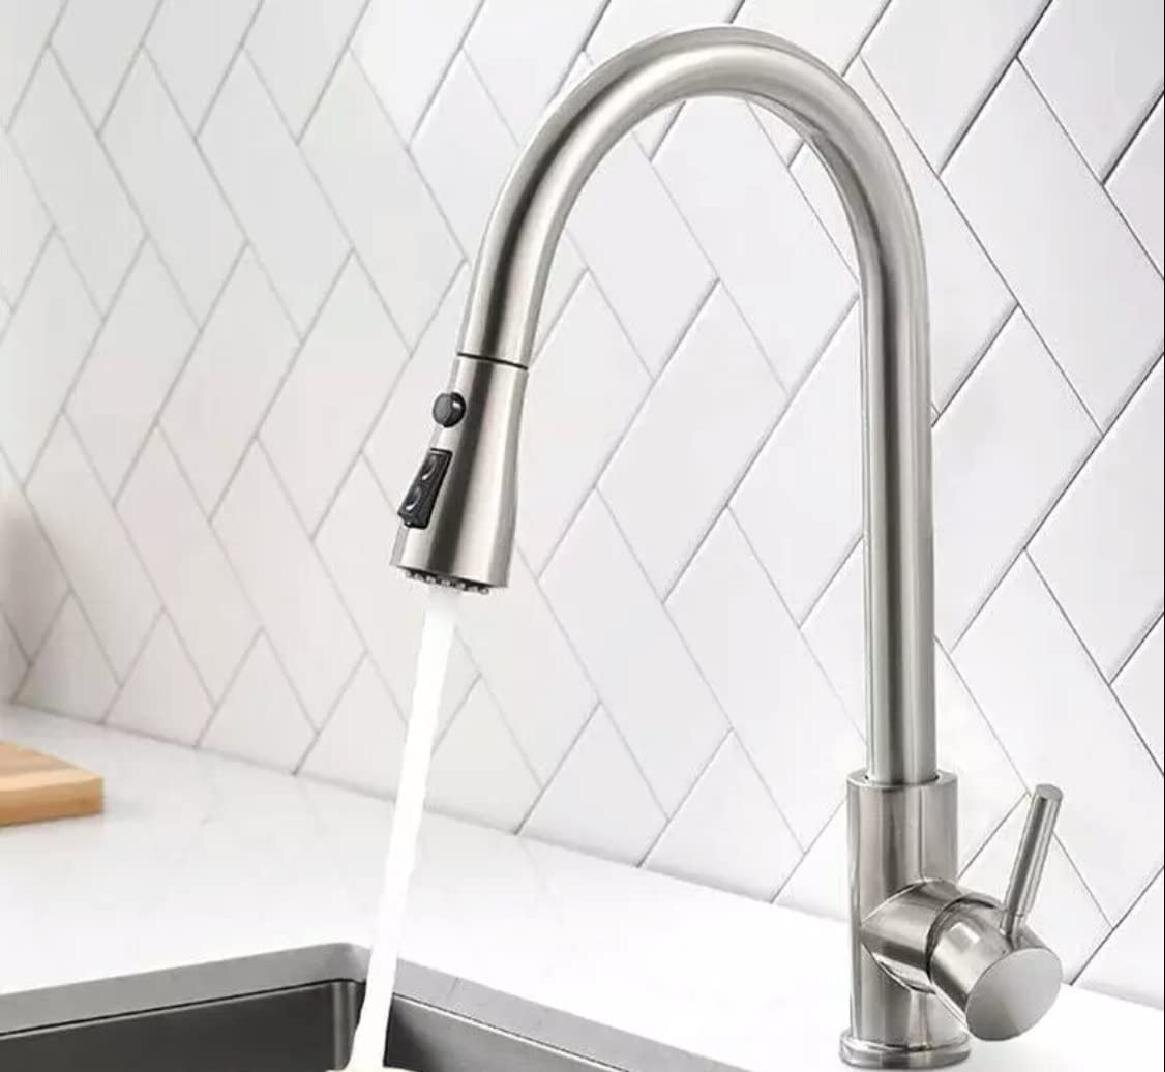 Kitchen Faucet Silver Kitchen Sink Faucet Kitchen Faucets with Pull Down Sprayer 360 Swivel High Arc Pull Out Faucet Head Commercial Faucets with Deck Plate for 1 or 3 Hole